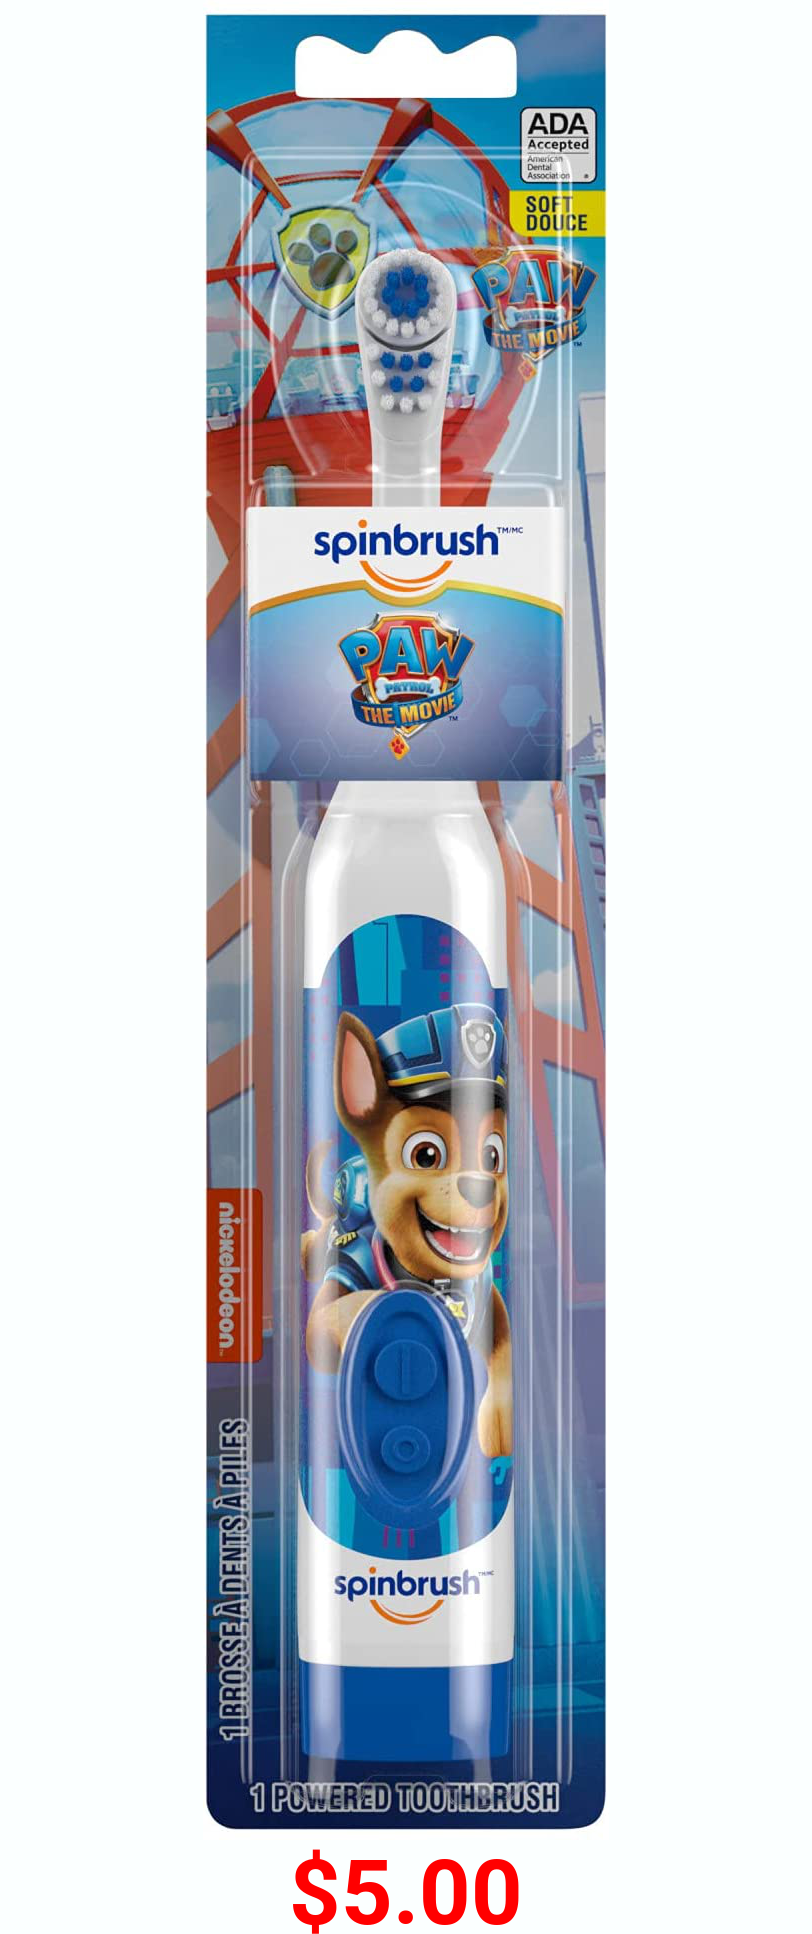 Paw Patrol Arm & Hammer Kids Spinbrush, Soft, Electric Battery Toothbrush, 1 ct, Character May Vary